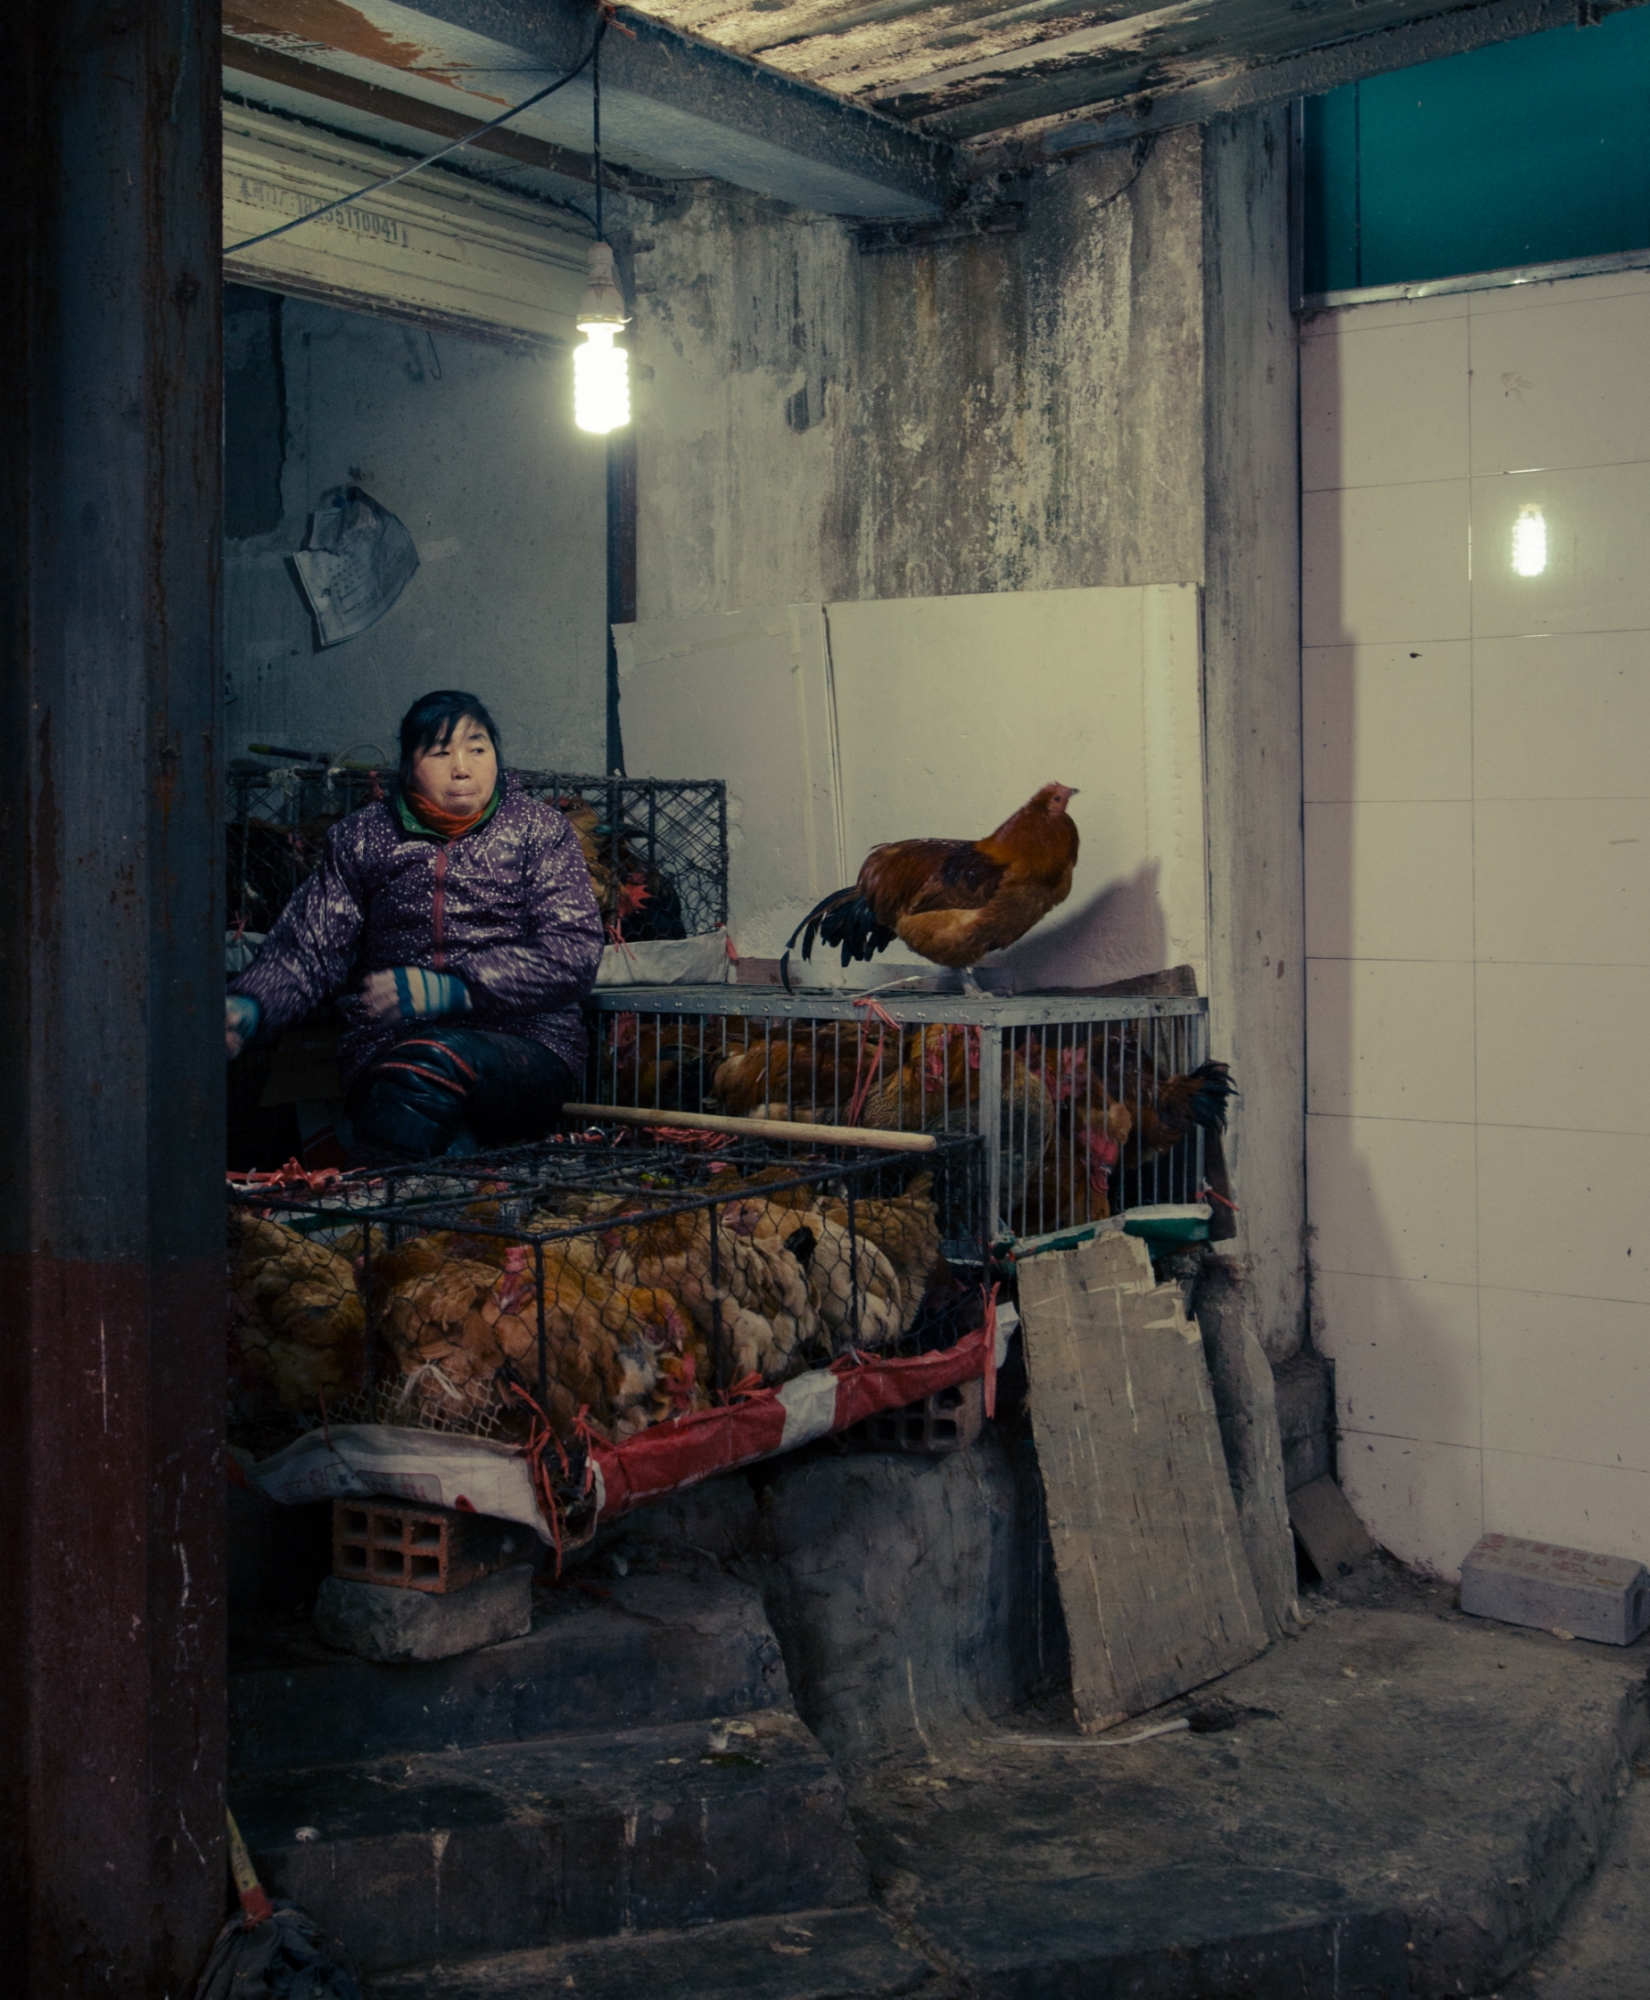 COVID-19 is widely believed to have originated from a live animal market in Wuhan, China (Source: Hao Rui/Unsplash)